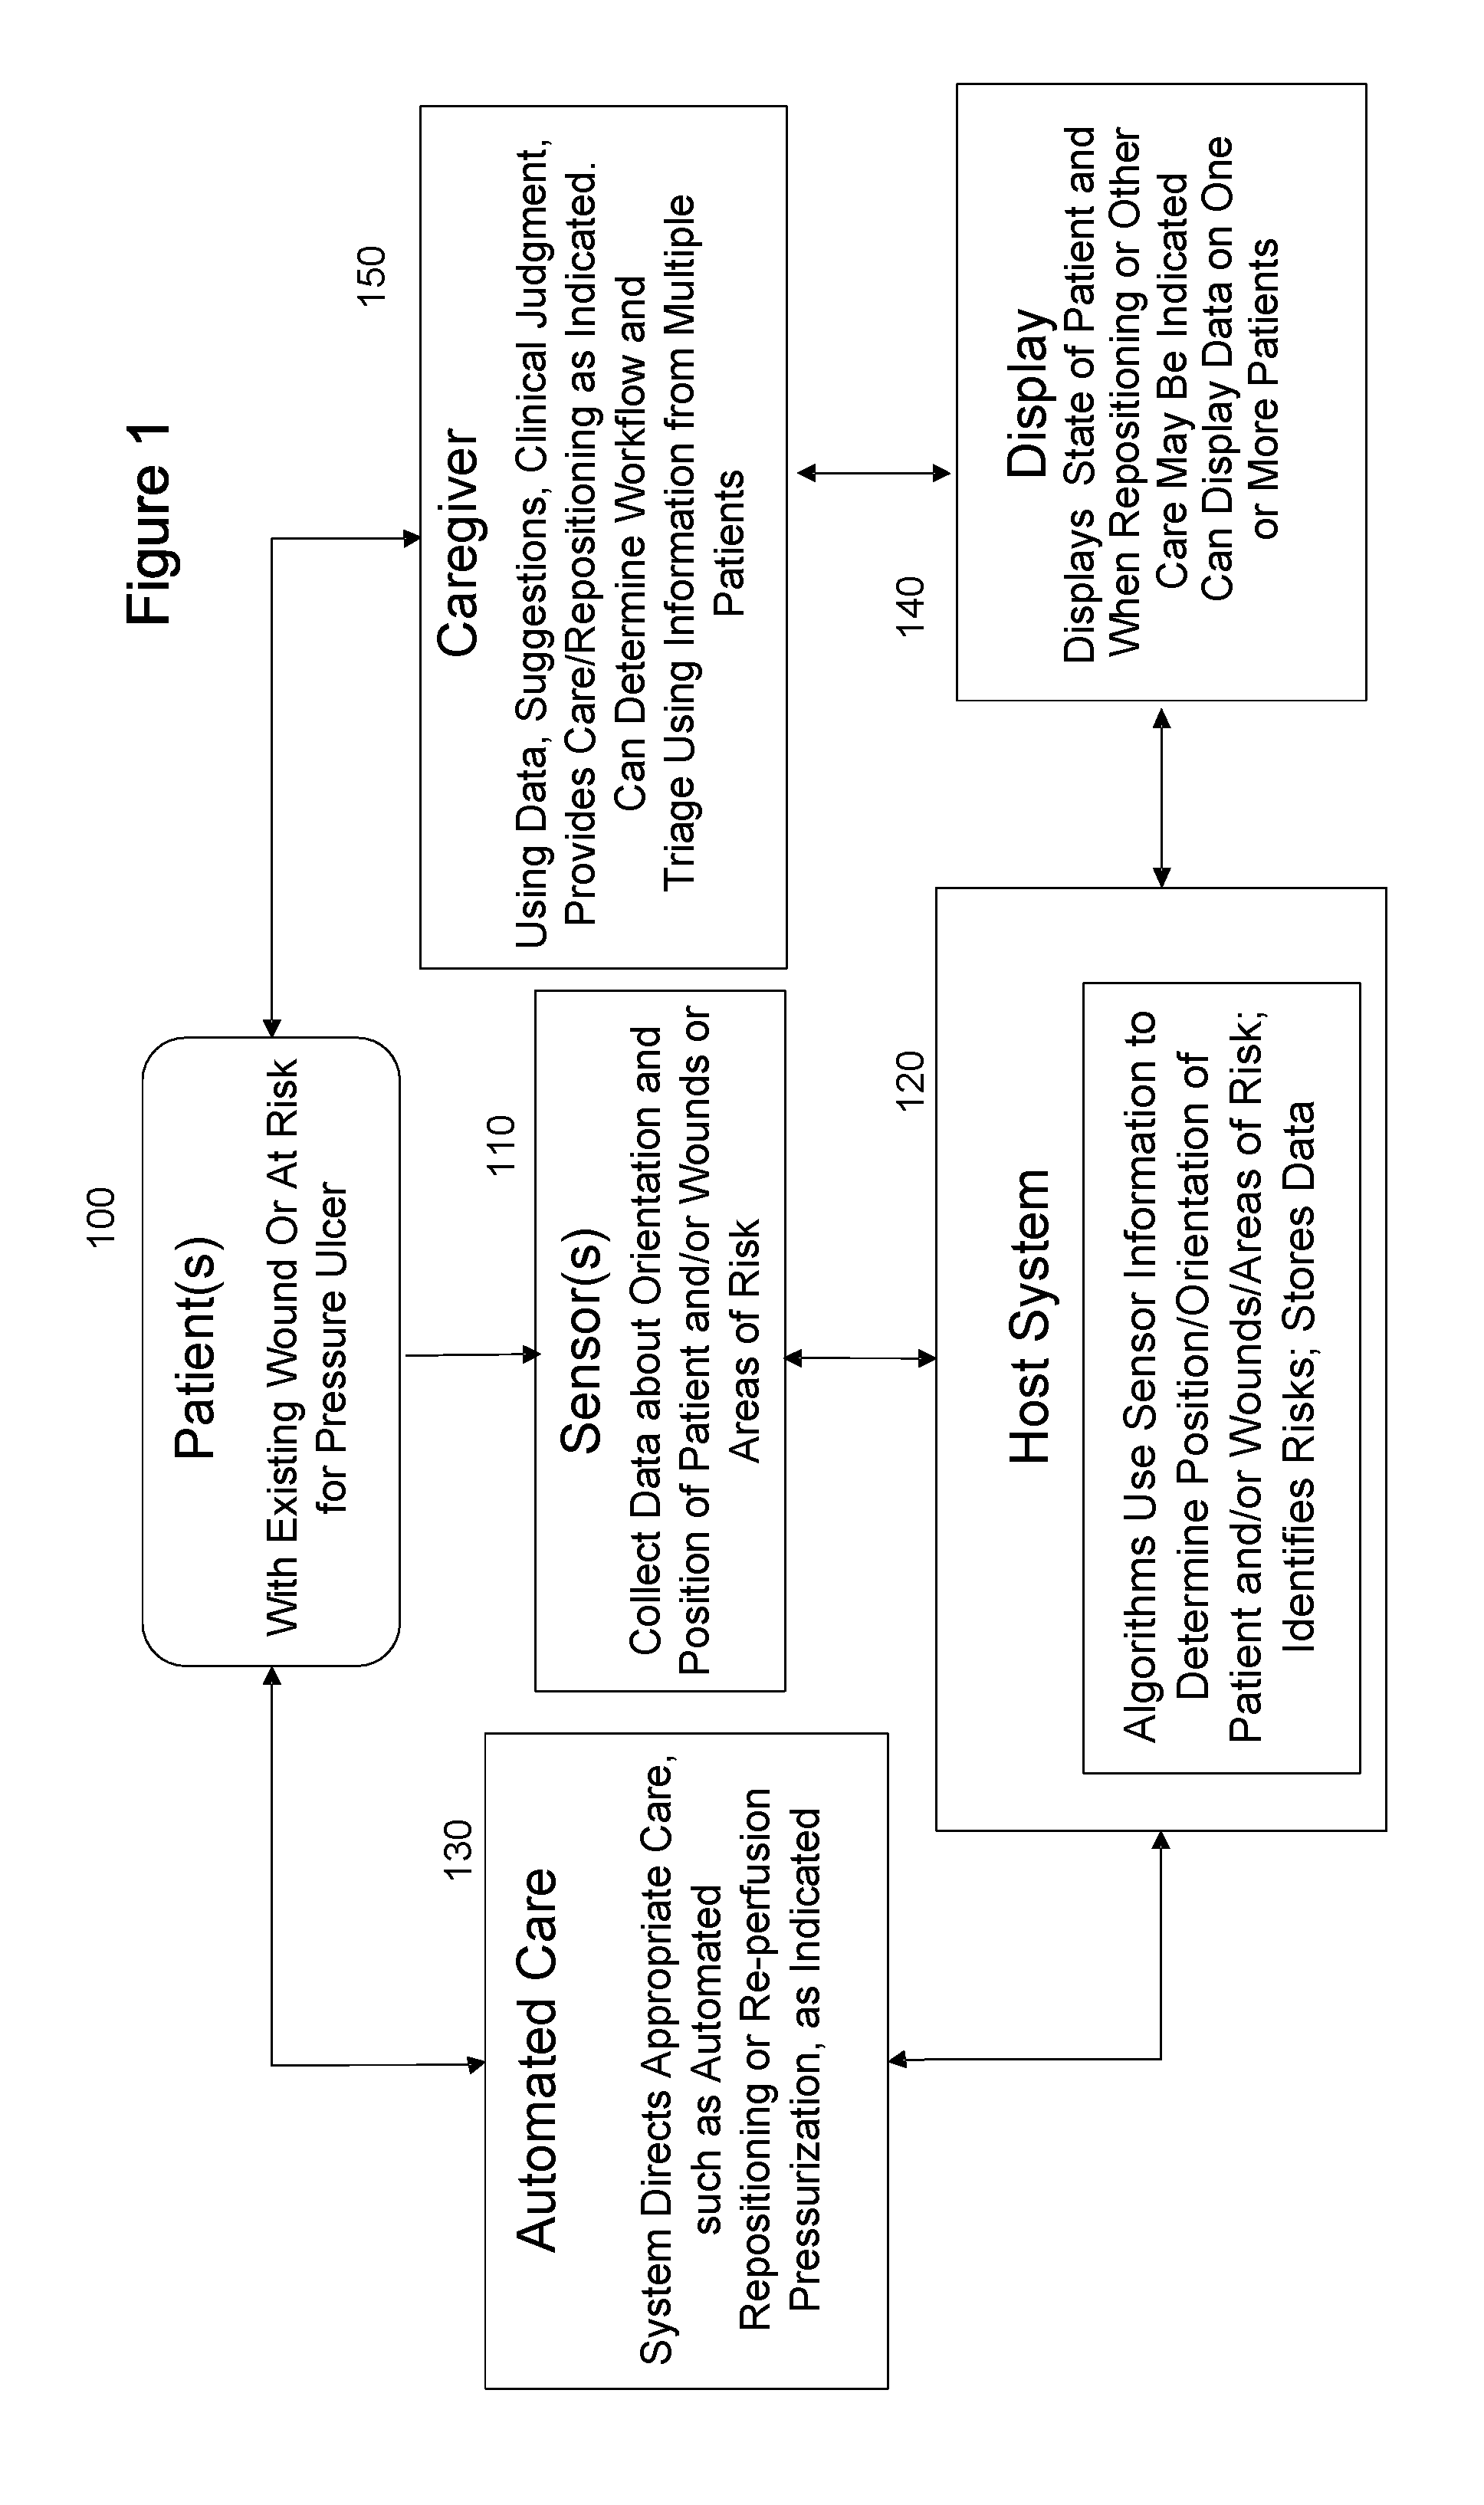 Systems, Devices and Methods For Preventing, Detecting, And Treating Pressure-Induced Ischemia, Pressure Ulcers, And Other Conditions